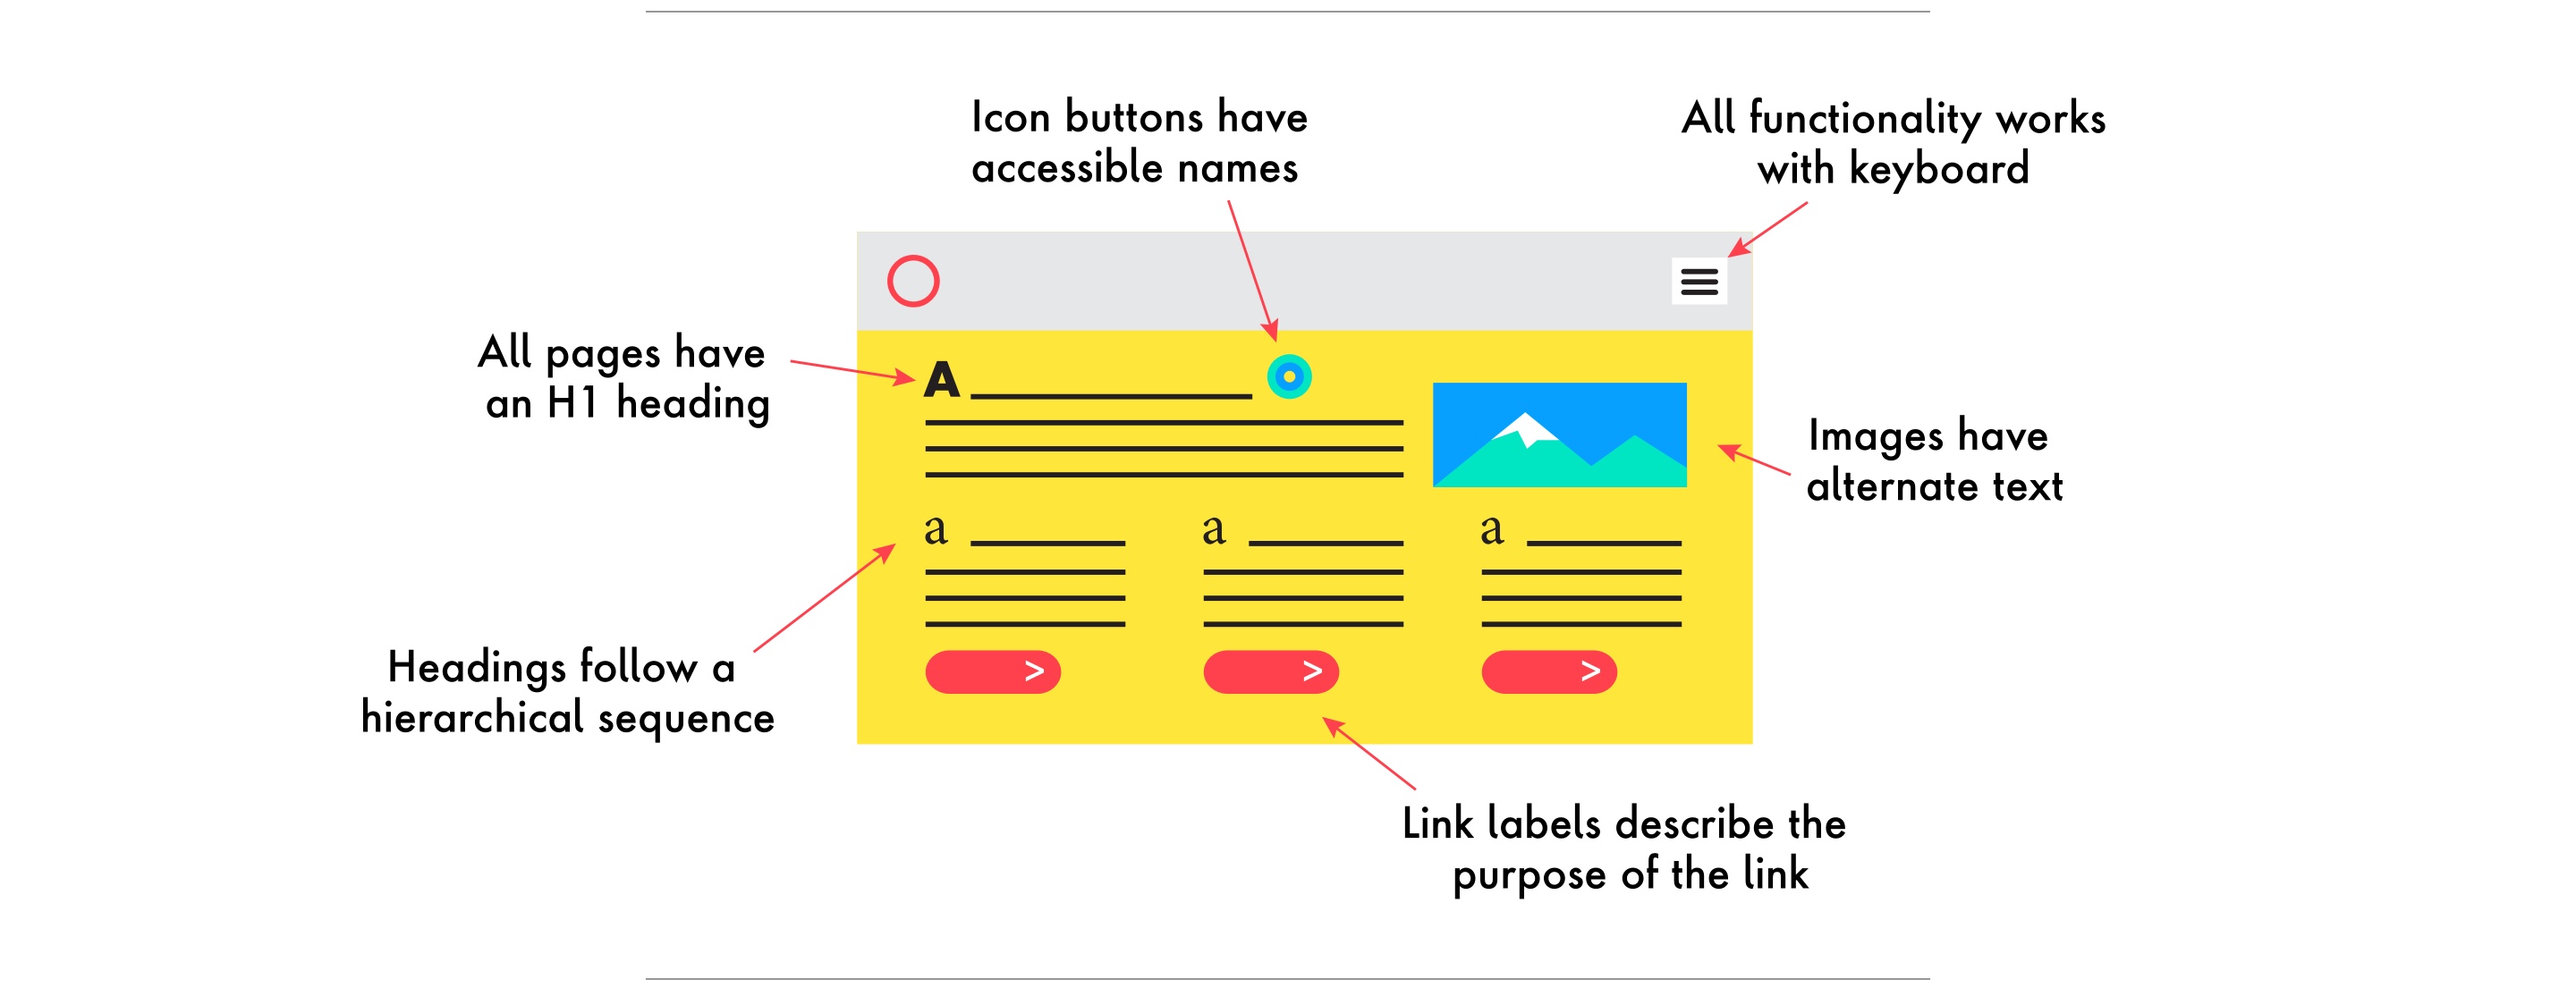 All pages have an H1 heading, Icon buttons have accessible names, all functionality works with keyboard, images have alternate text, link labels describe the purpose of the link, headings follow a hierarchical sequence